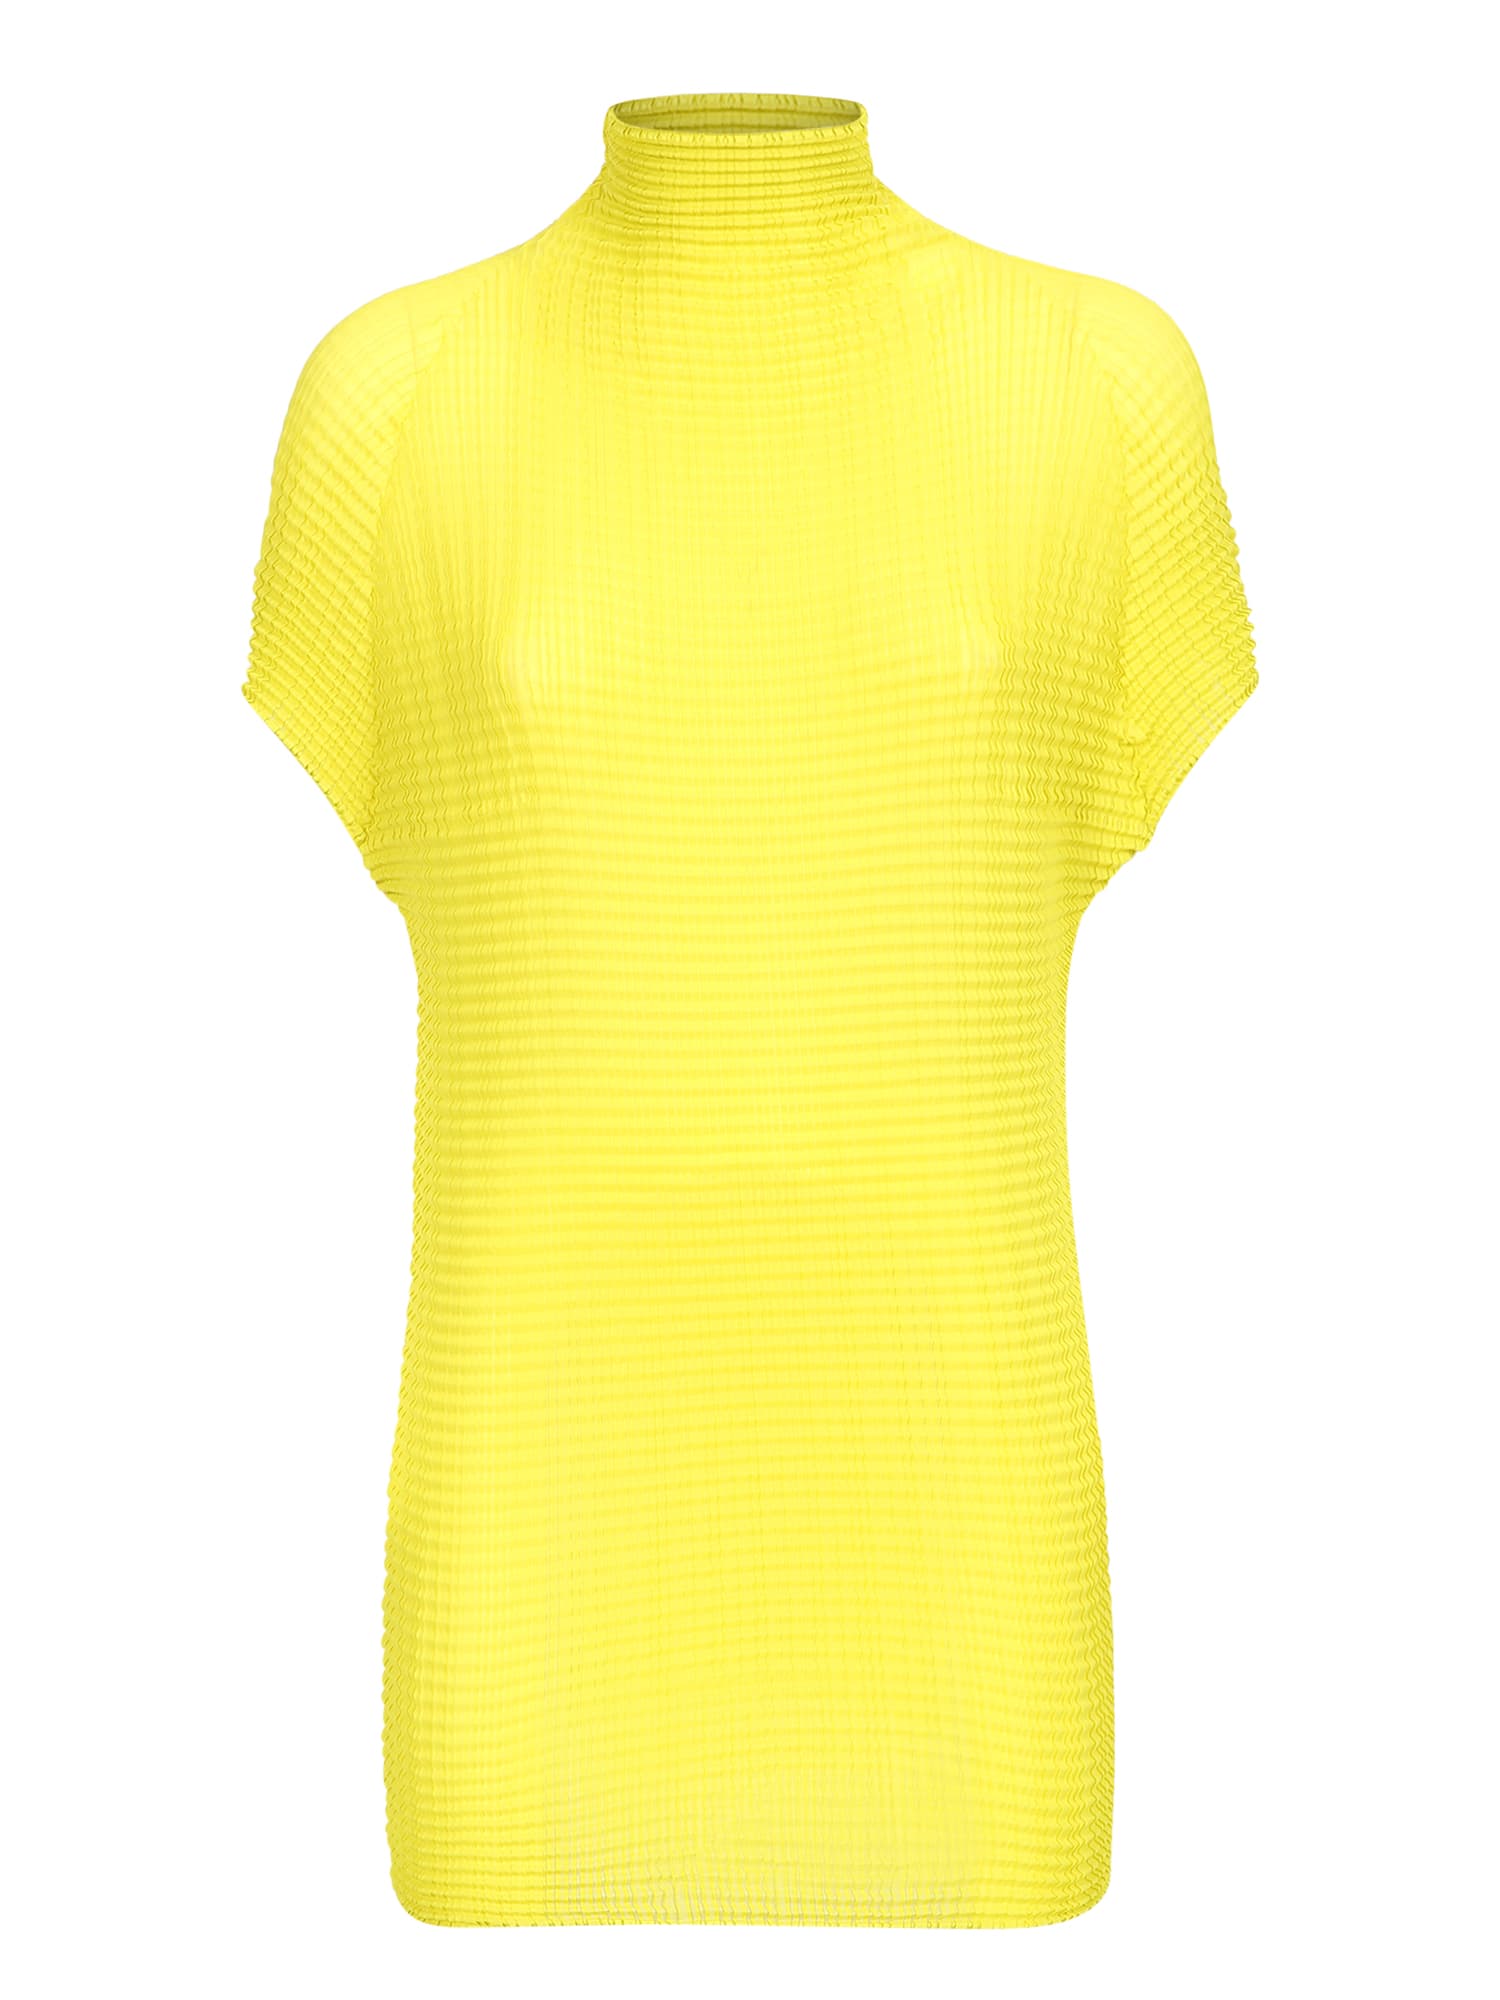 Issey Miyake Yellow Wooly Pleats Top